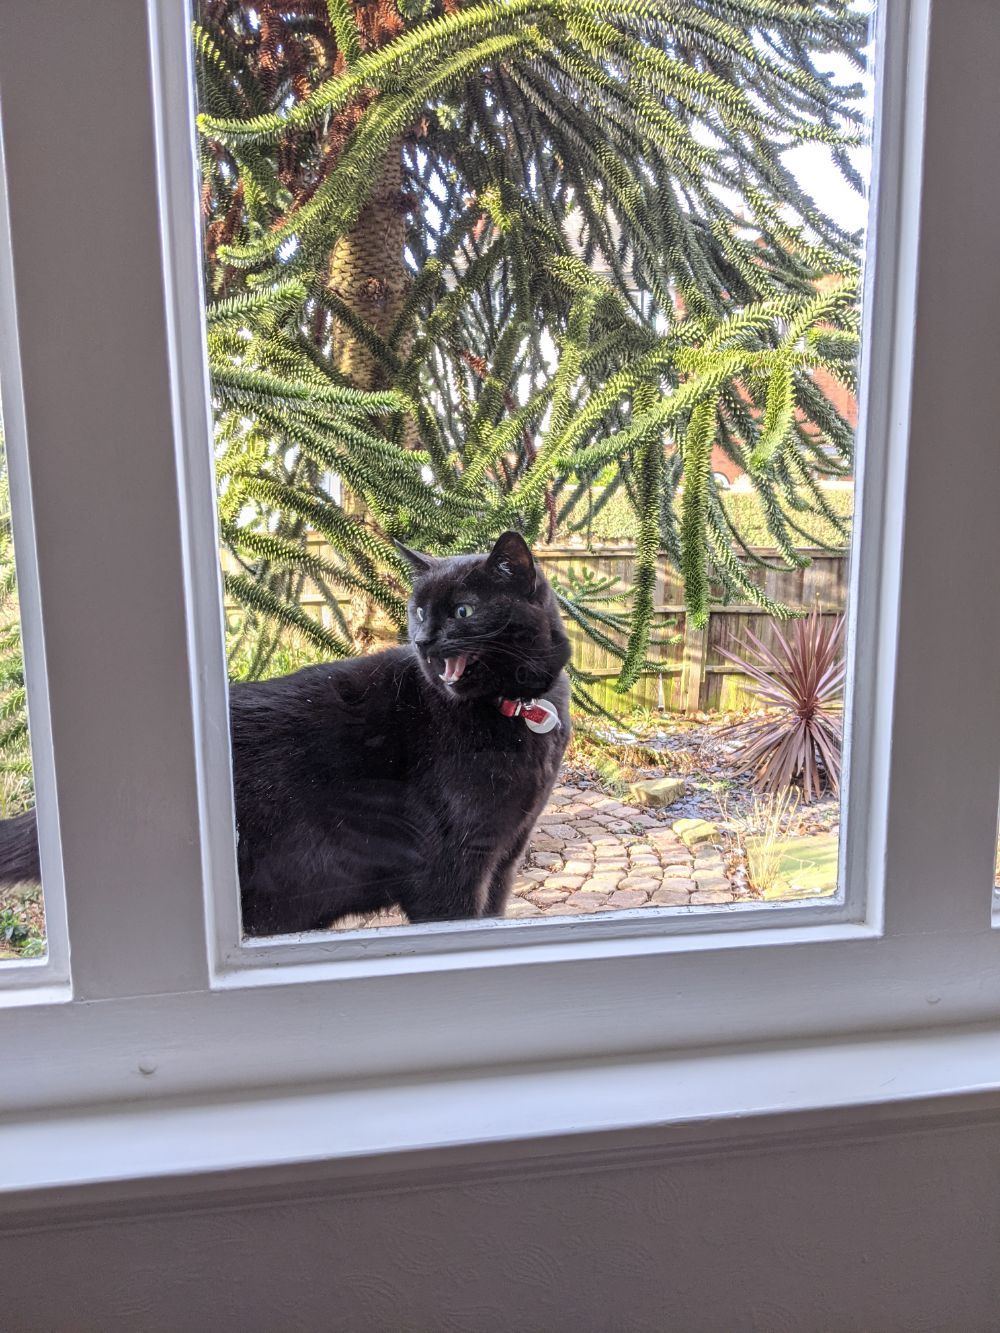 Black cat standing outside on the windowsill outside the living room, looking inside and meowing